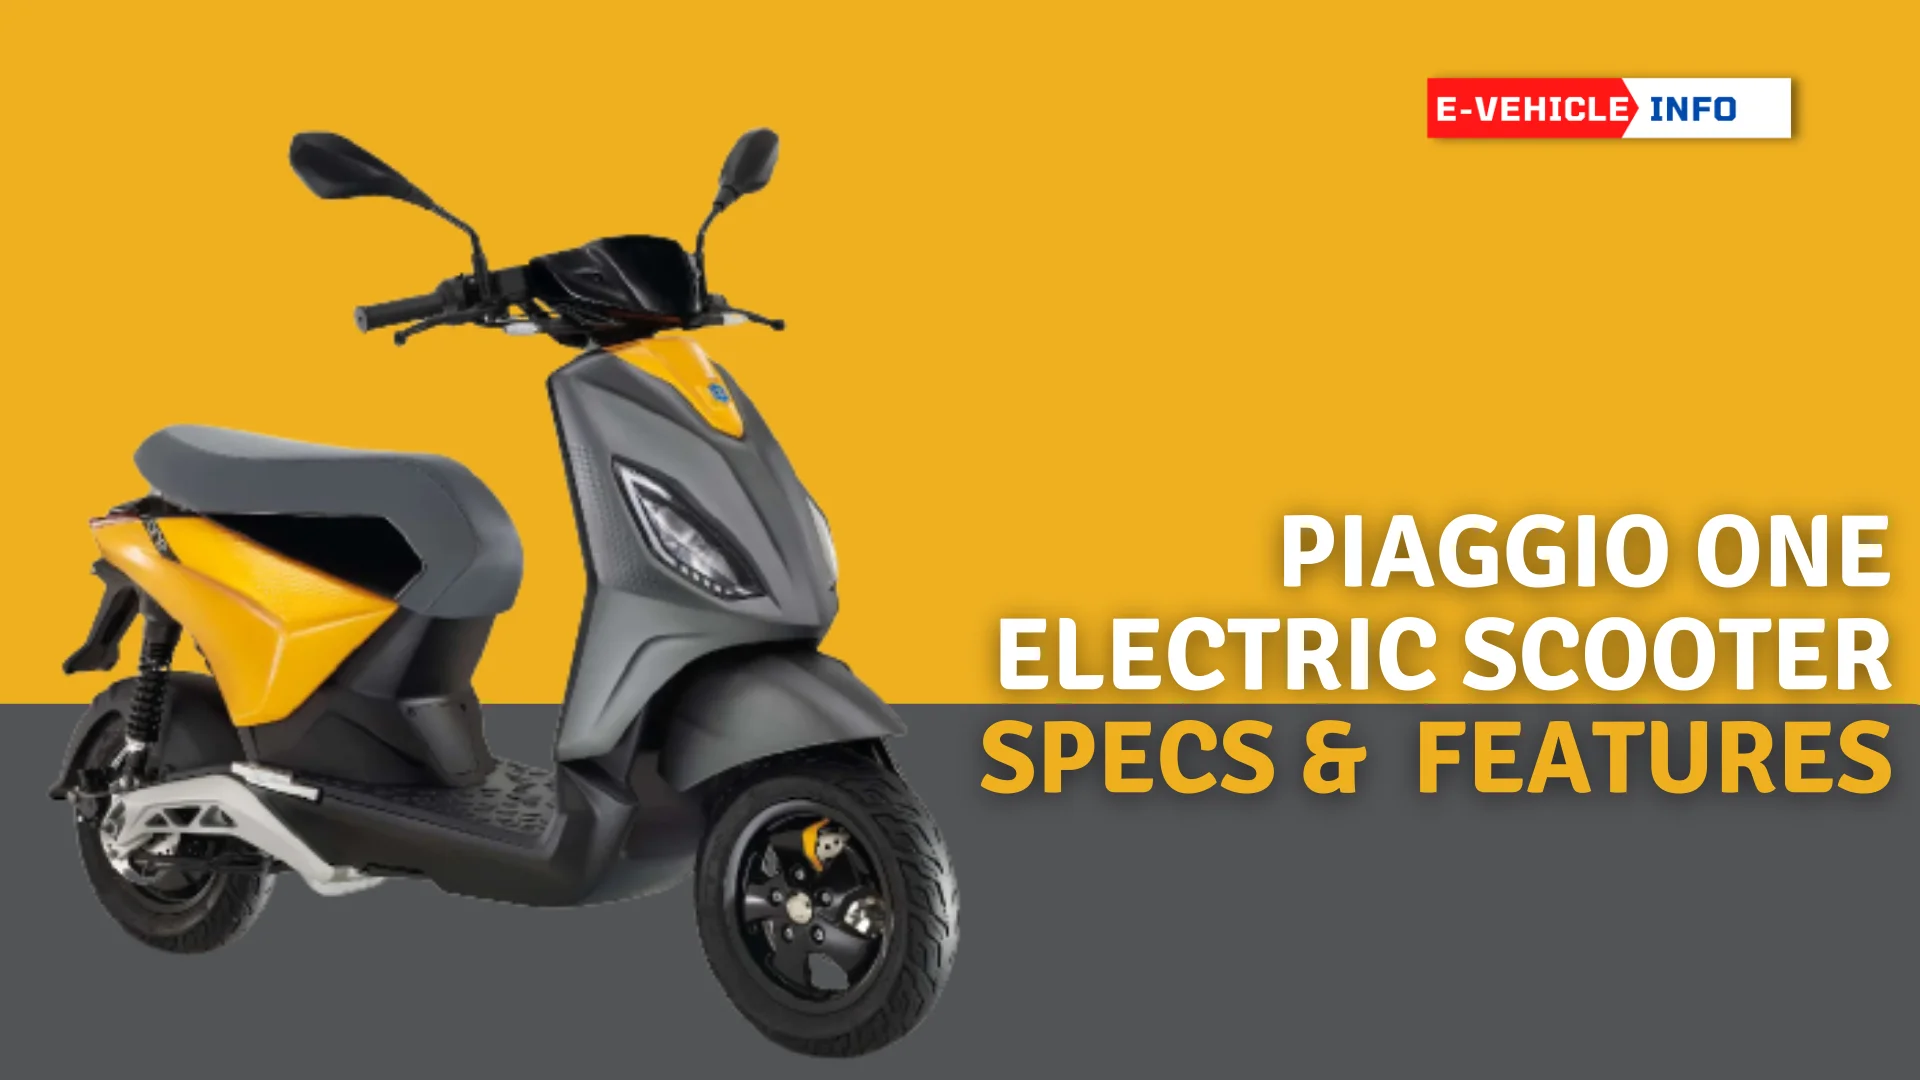 https://e-vehicleinfo.com/piaggio-one-electric-scooter-specifications-and-top-features/